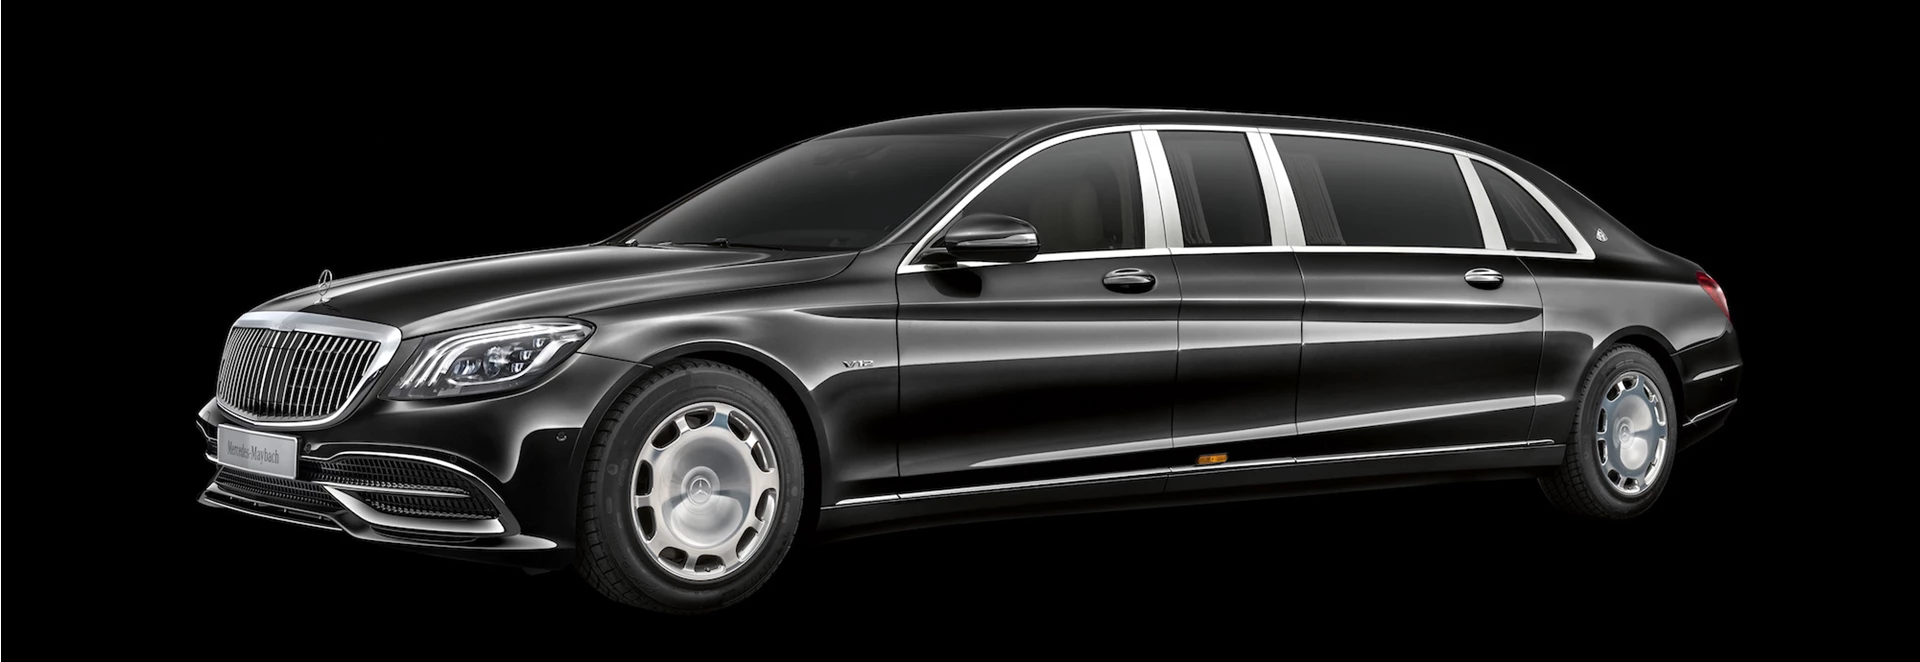 Mercedes-Maybach Pullman refreshed with new grille and interior upgrades